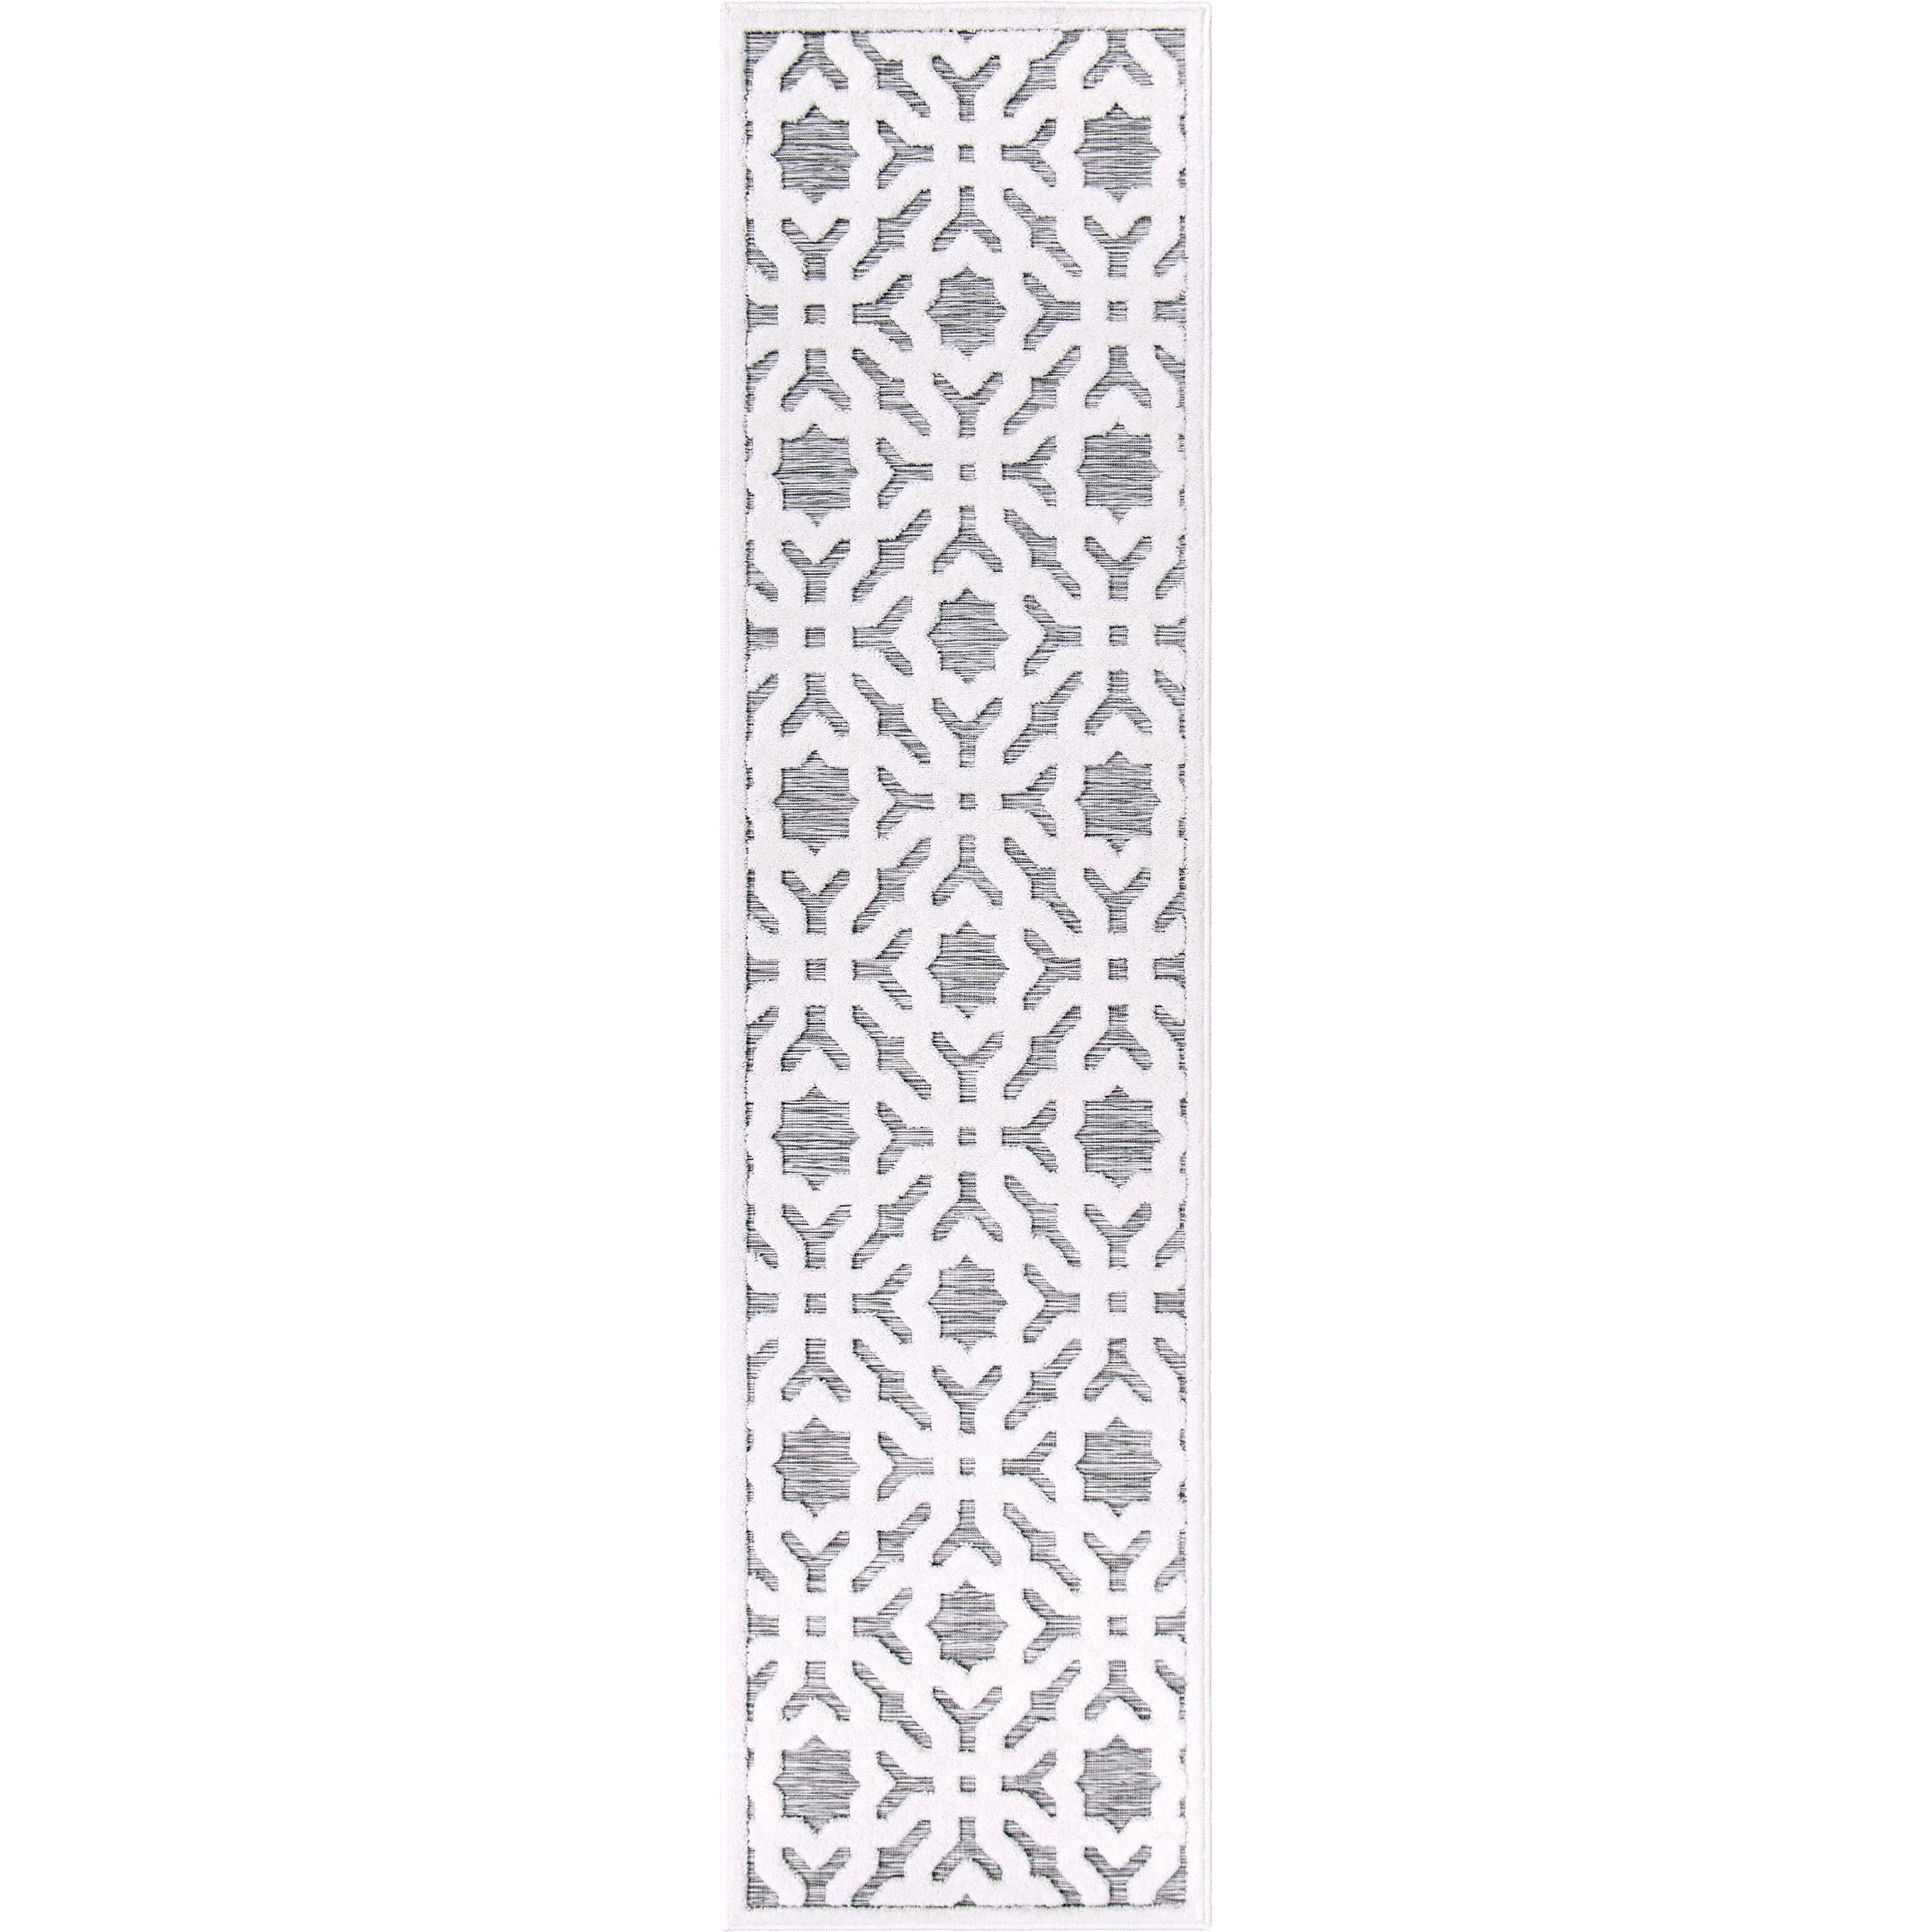 My Texas House Claire, Contemporary, Geometric, Woven Runner Rug, 1'11" x 7'6" | Walmart (US)